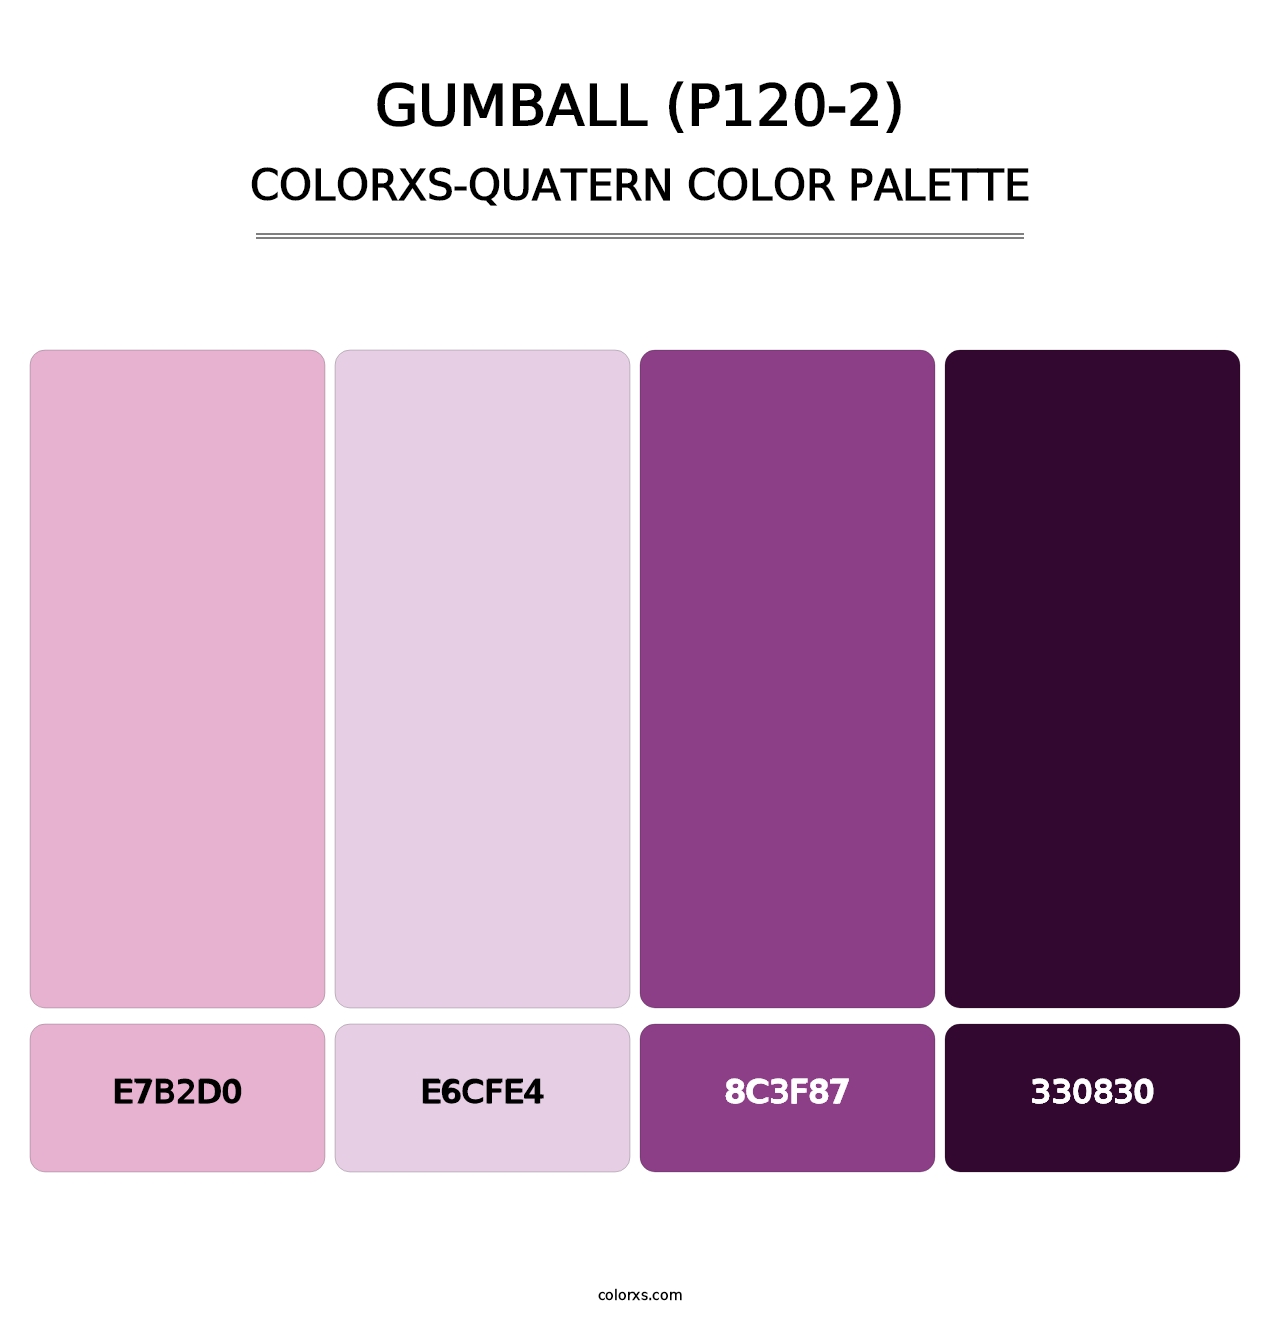 Gumball (P120-2) - Colorxs Quatern Palette